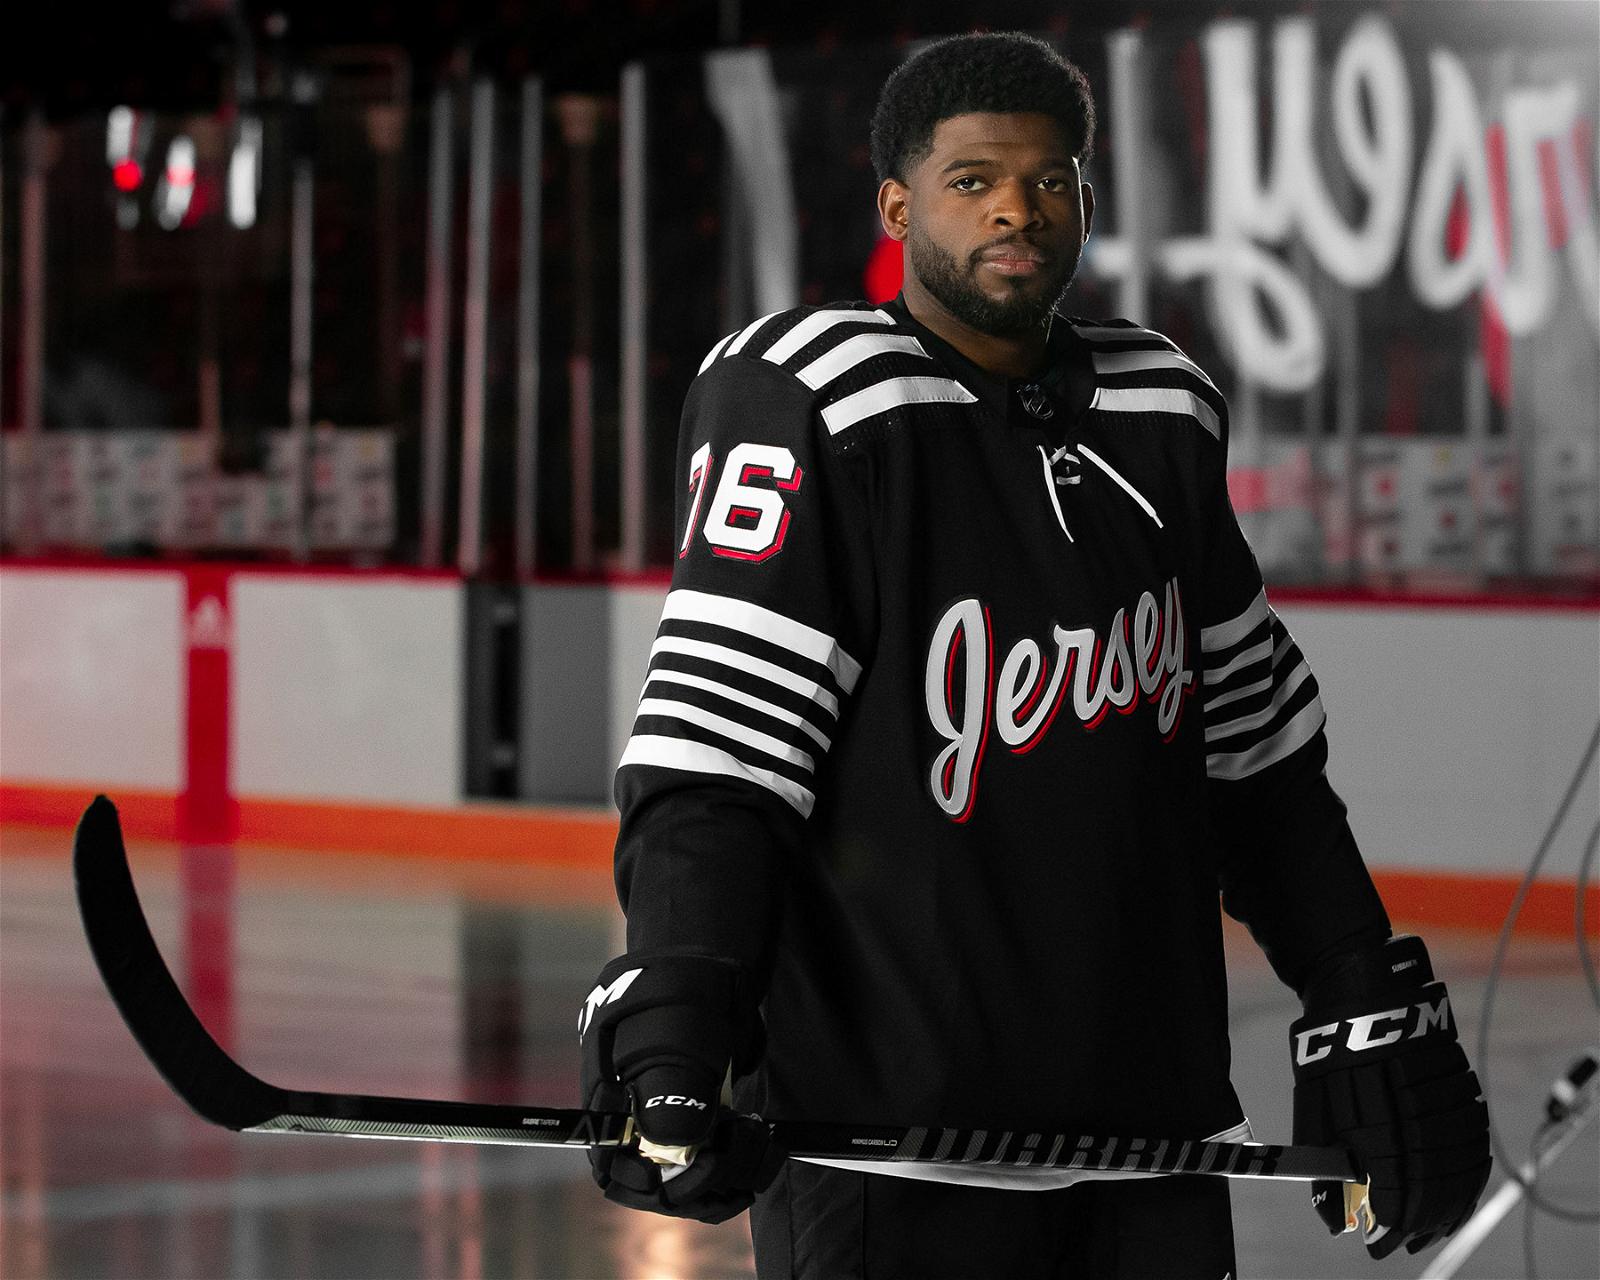 new jersey devils jersey,Save up to